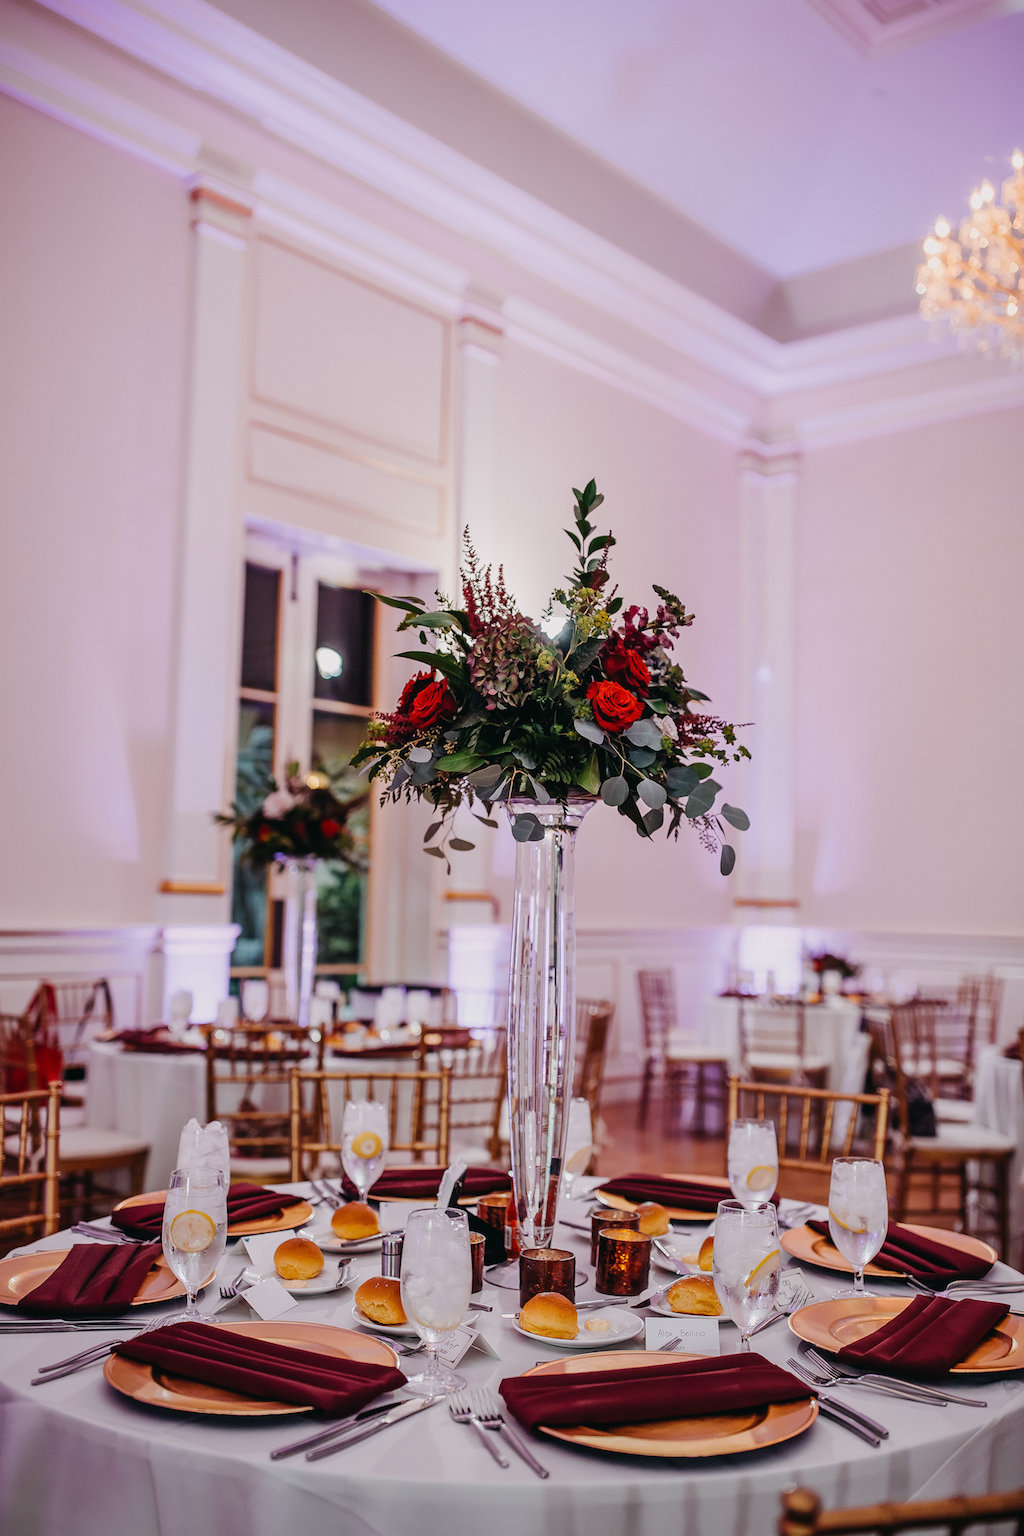 Modern Ballroom Wedding Reception Round Table with Red Linens, Red and Orange Floral with Greenery Tall Centerpiece in Clear Glass Vase, with Gold Chargers